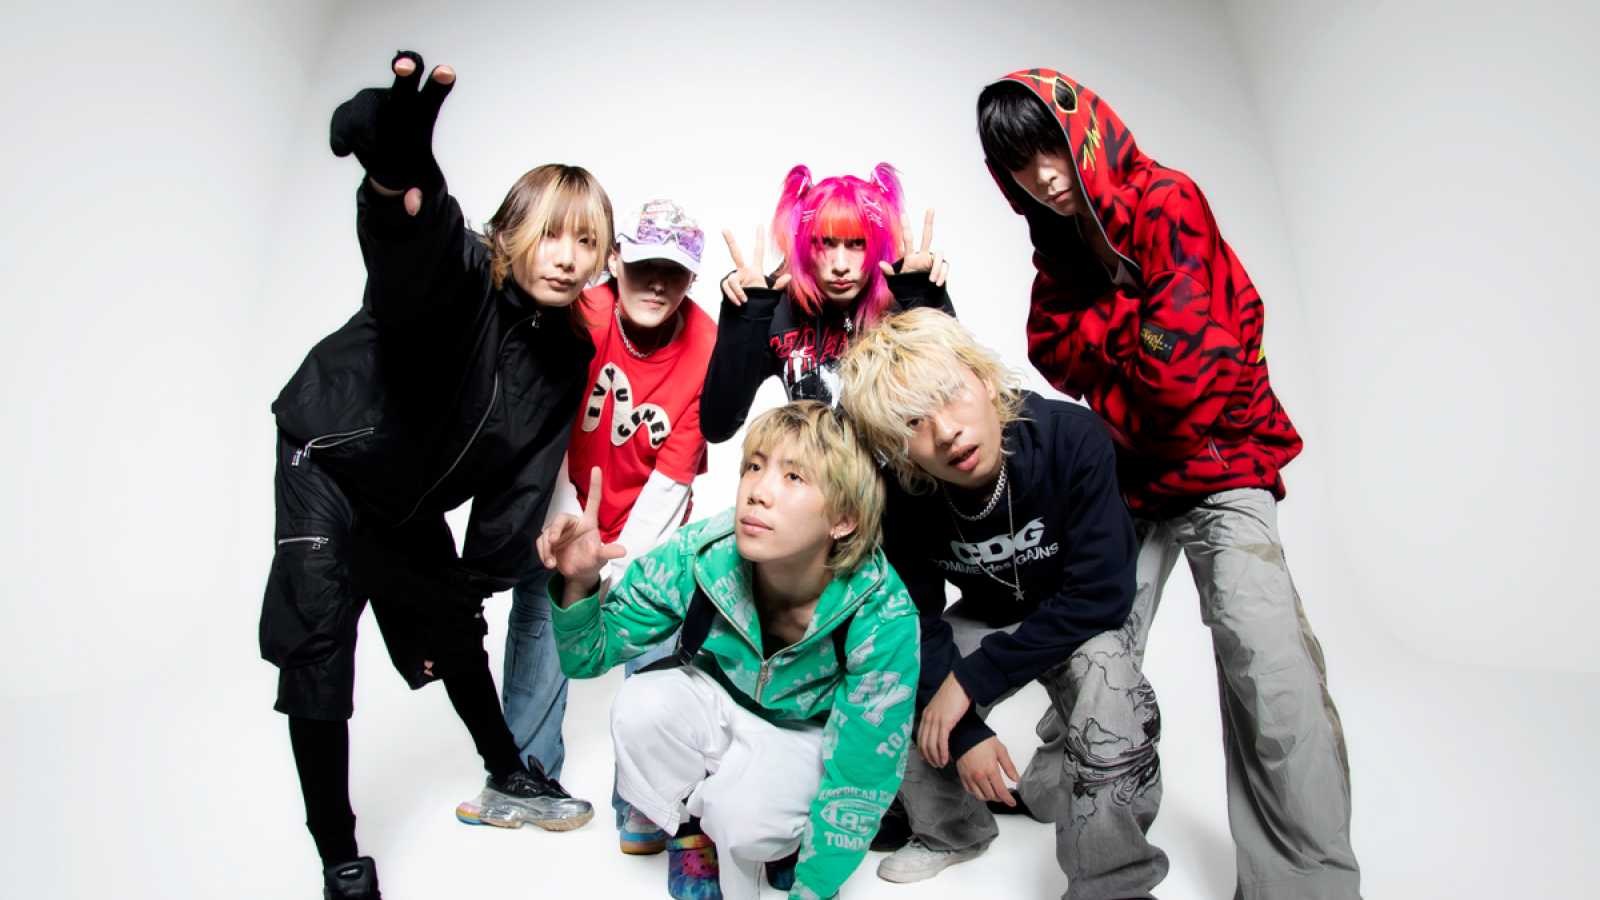 STARKIDS Announce New Label and Digital Single © STARKIDS. All rights reserved.